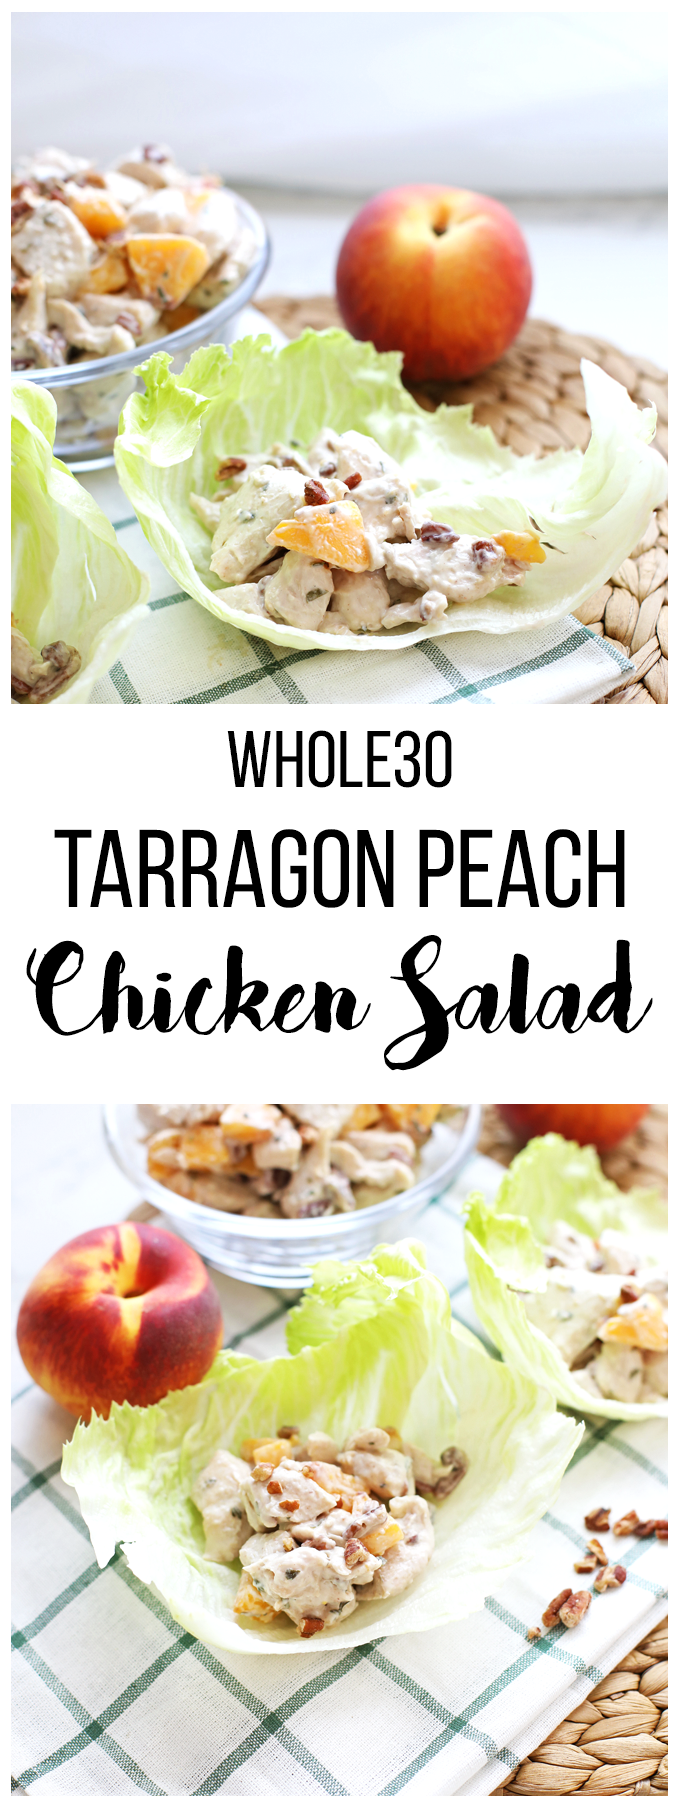 This Tarragon Peach Chicken Salad is simple to throw together and whole30 compliant! Great to meal prep on Sunday for week!